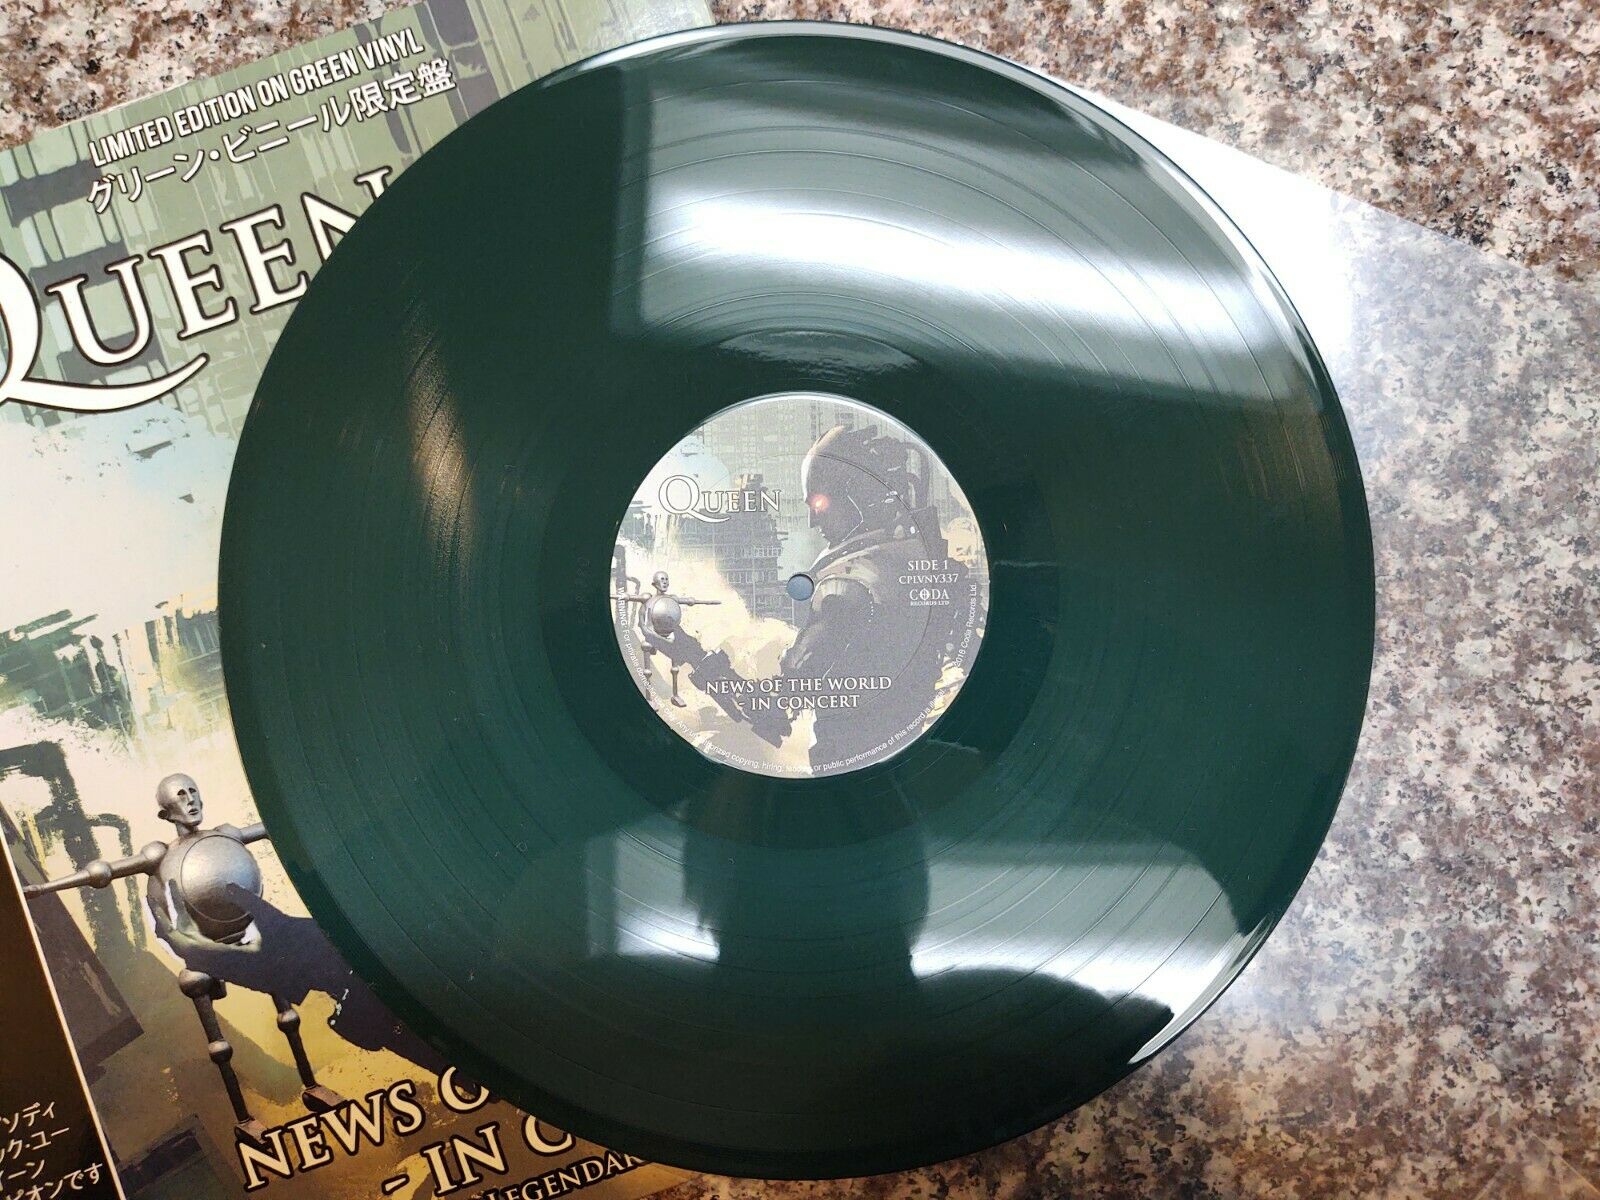 popsike.com - QUEEN NEWS OF THE WORLD IN CONCERT Record GREEN Color Vinyl  CODA Bootleg UK LP - auction details